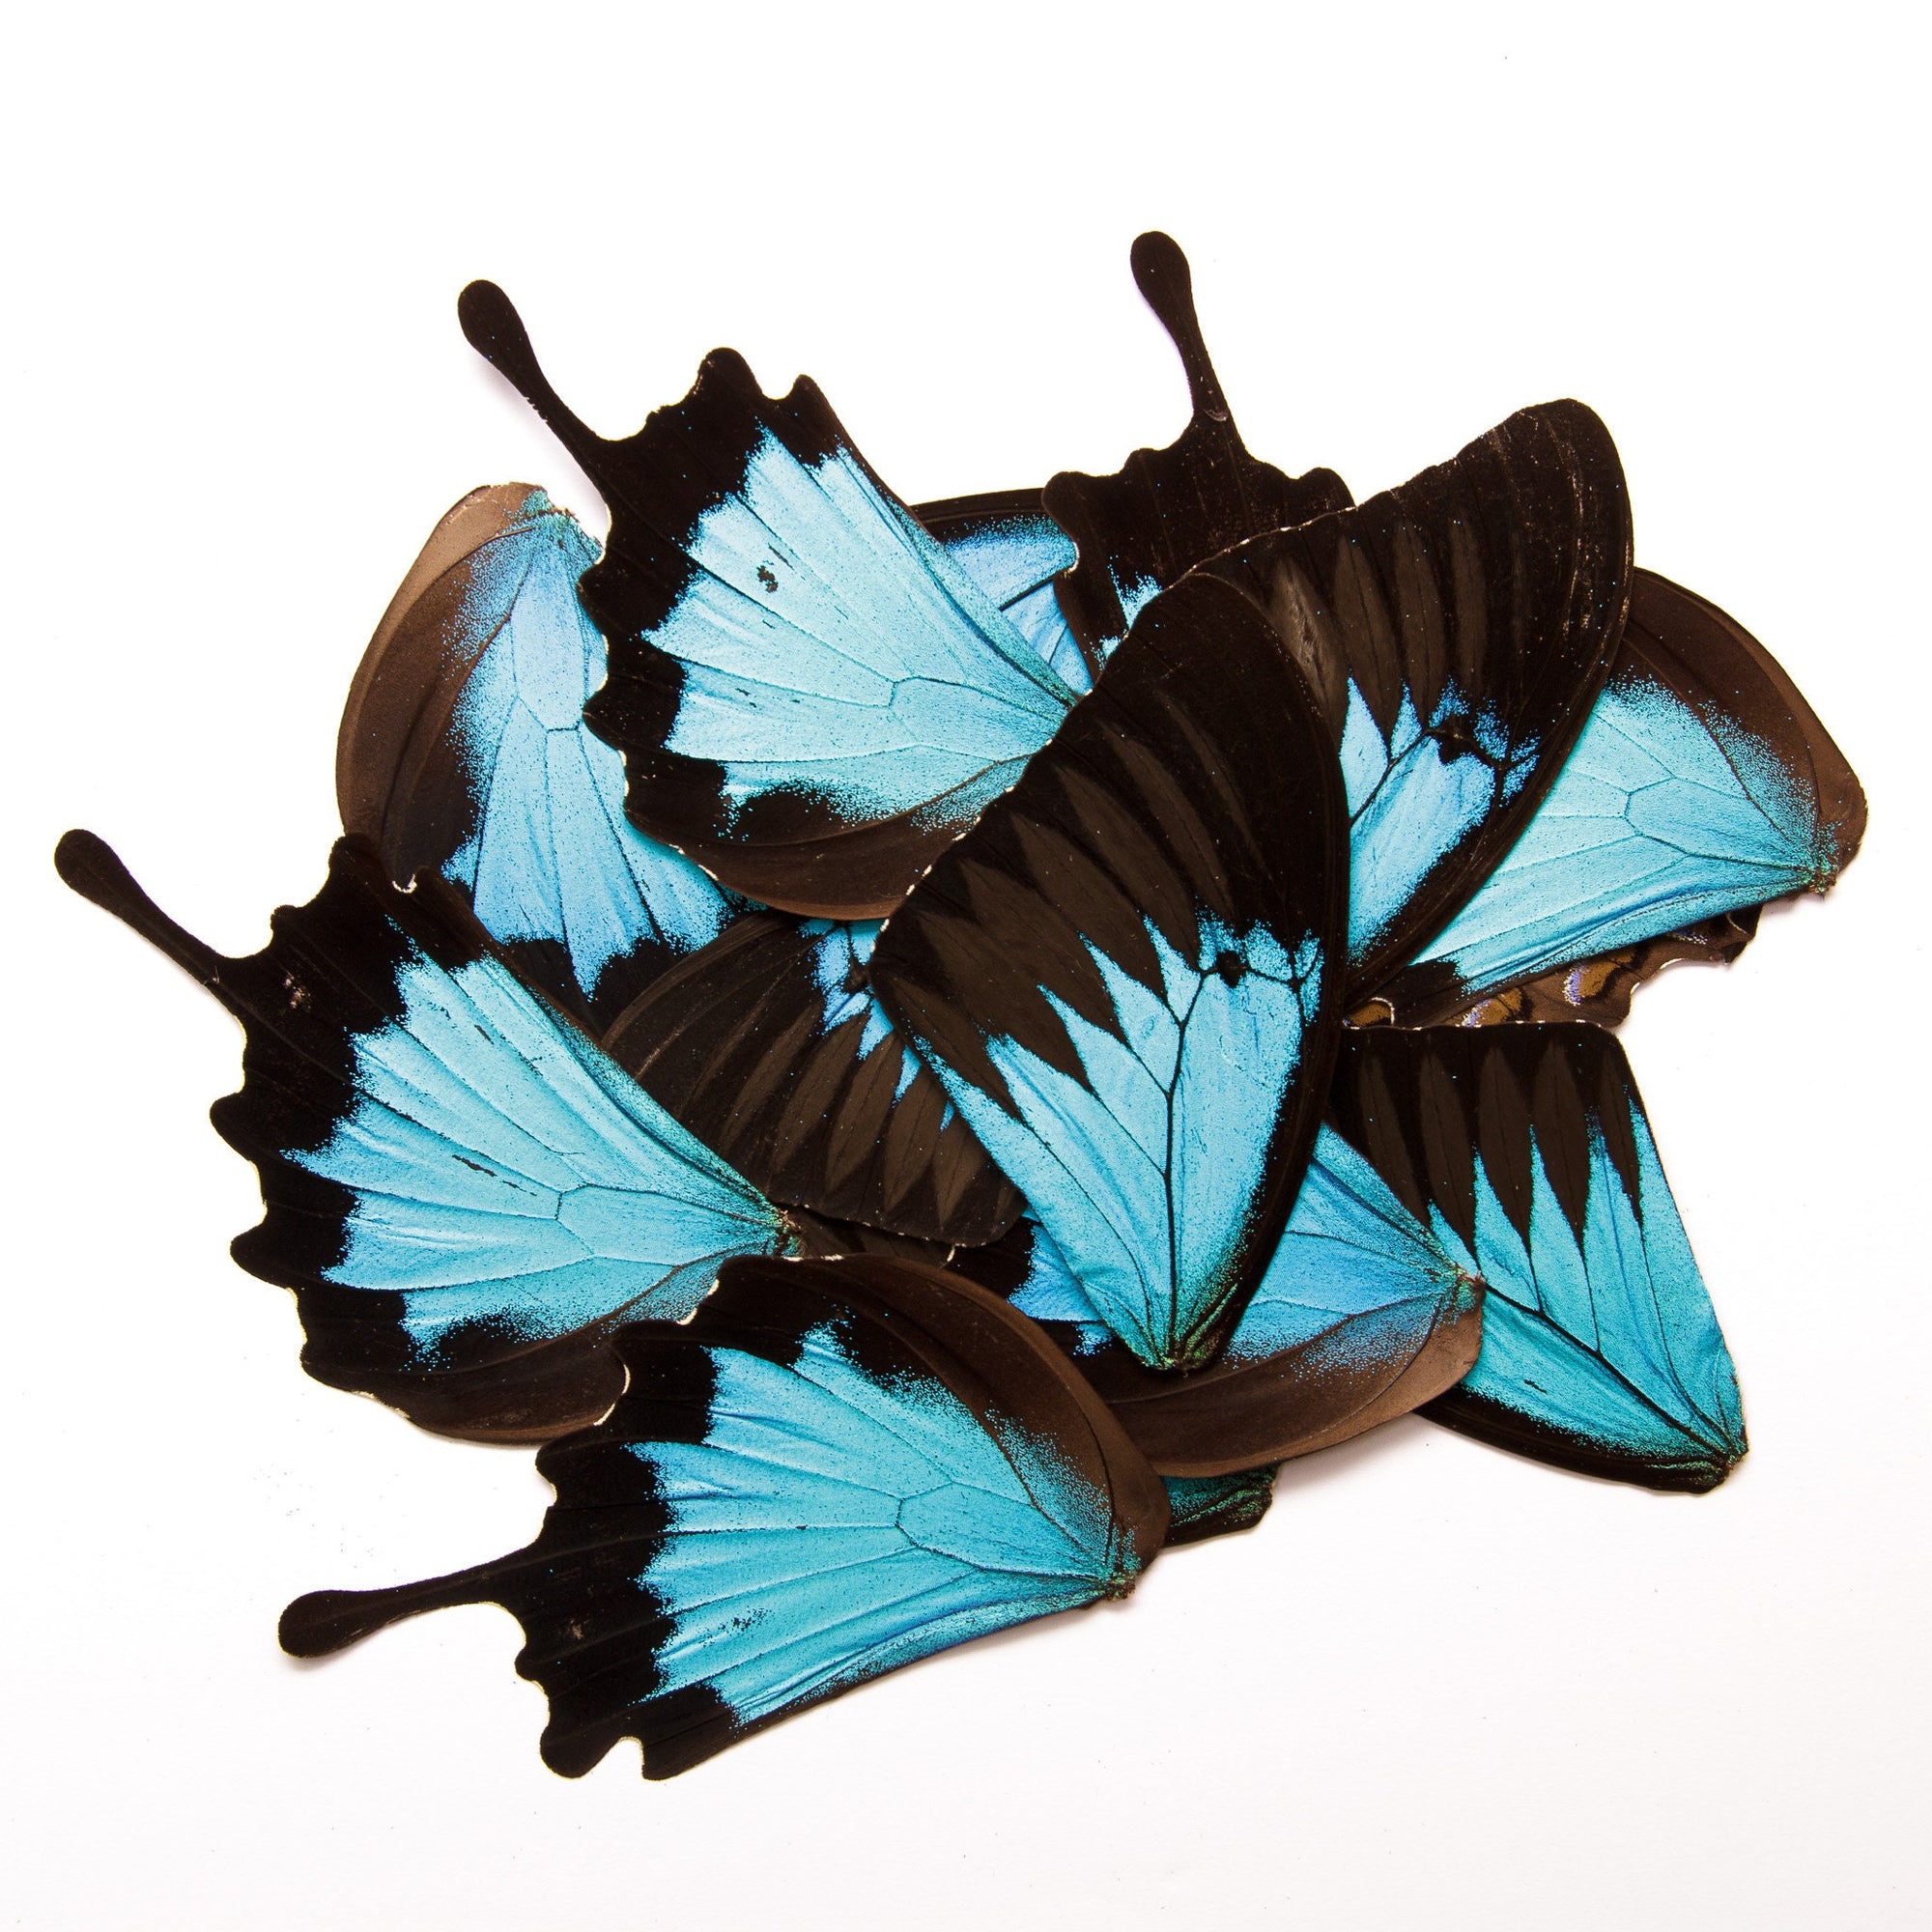 16 Butterfly Wings BLUE Swallowtail (Papilio ulysses) Real Dry-preserved Specimens for Artistic Creation